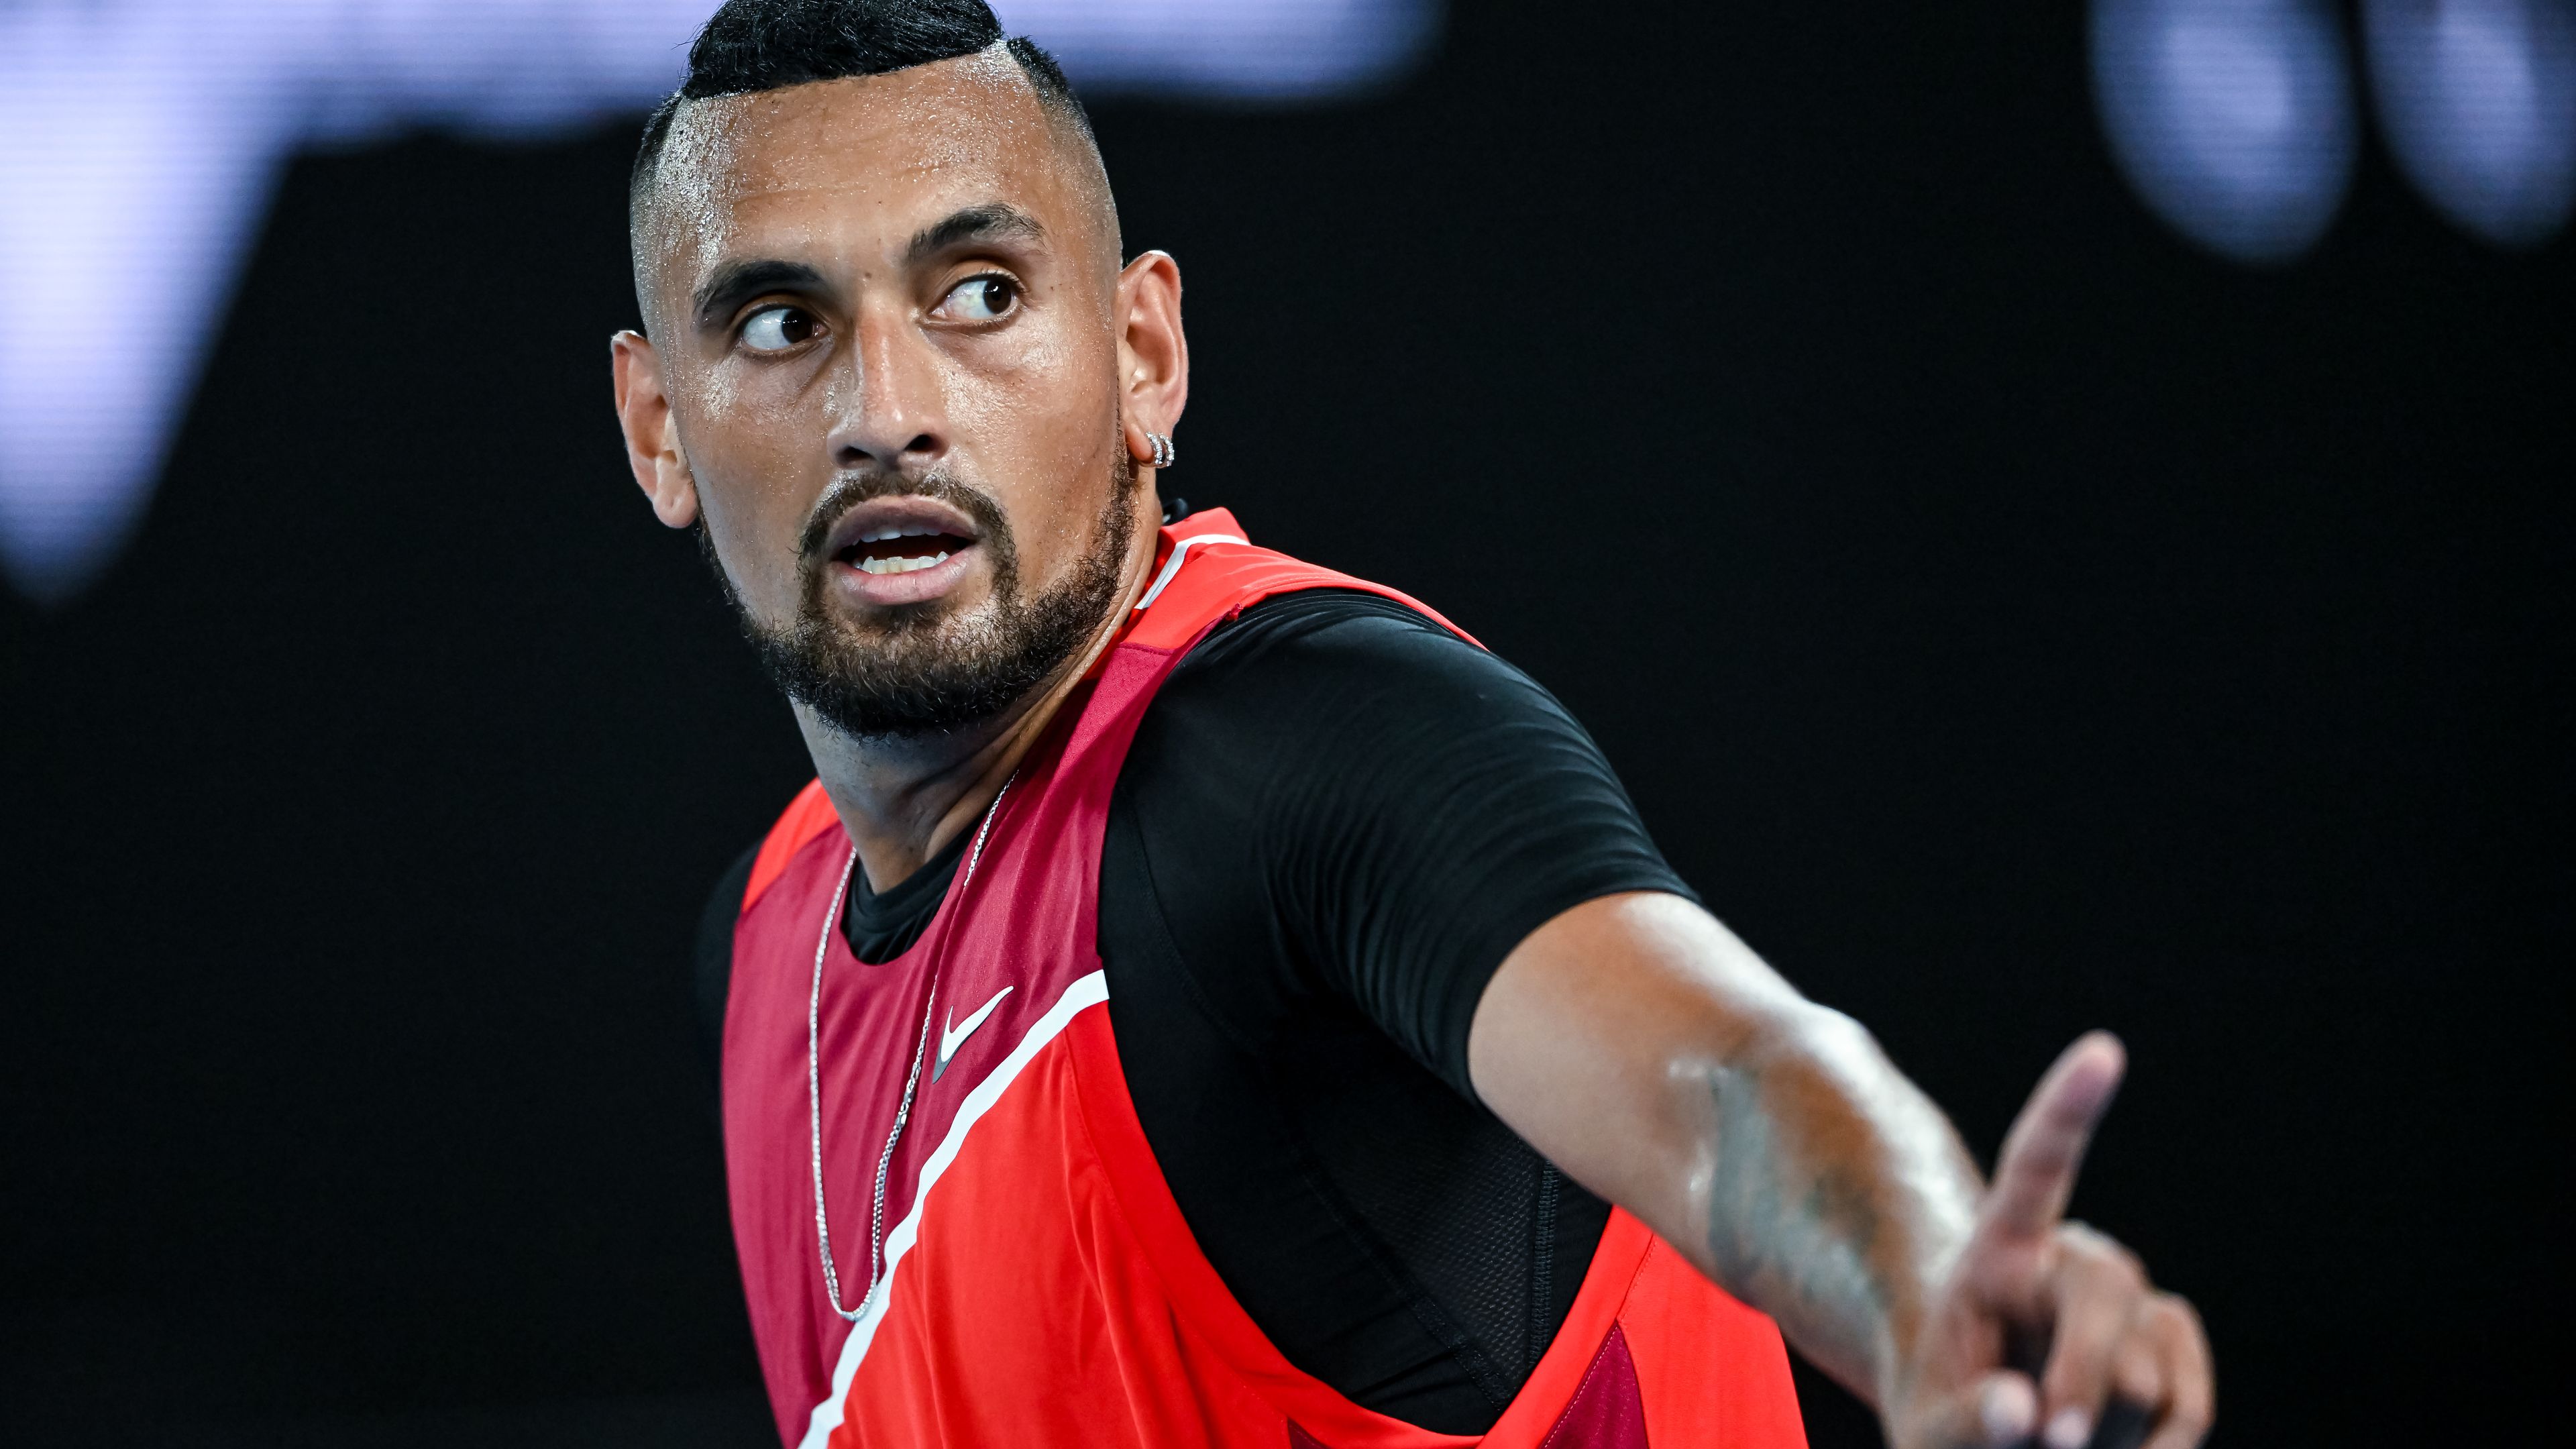 'National embarrassment': Nick Kyrgios has last laugh over critics after Novak Djokovic exhibition sellout